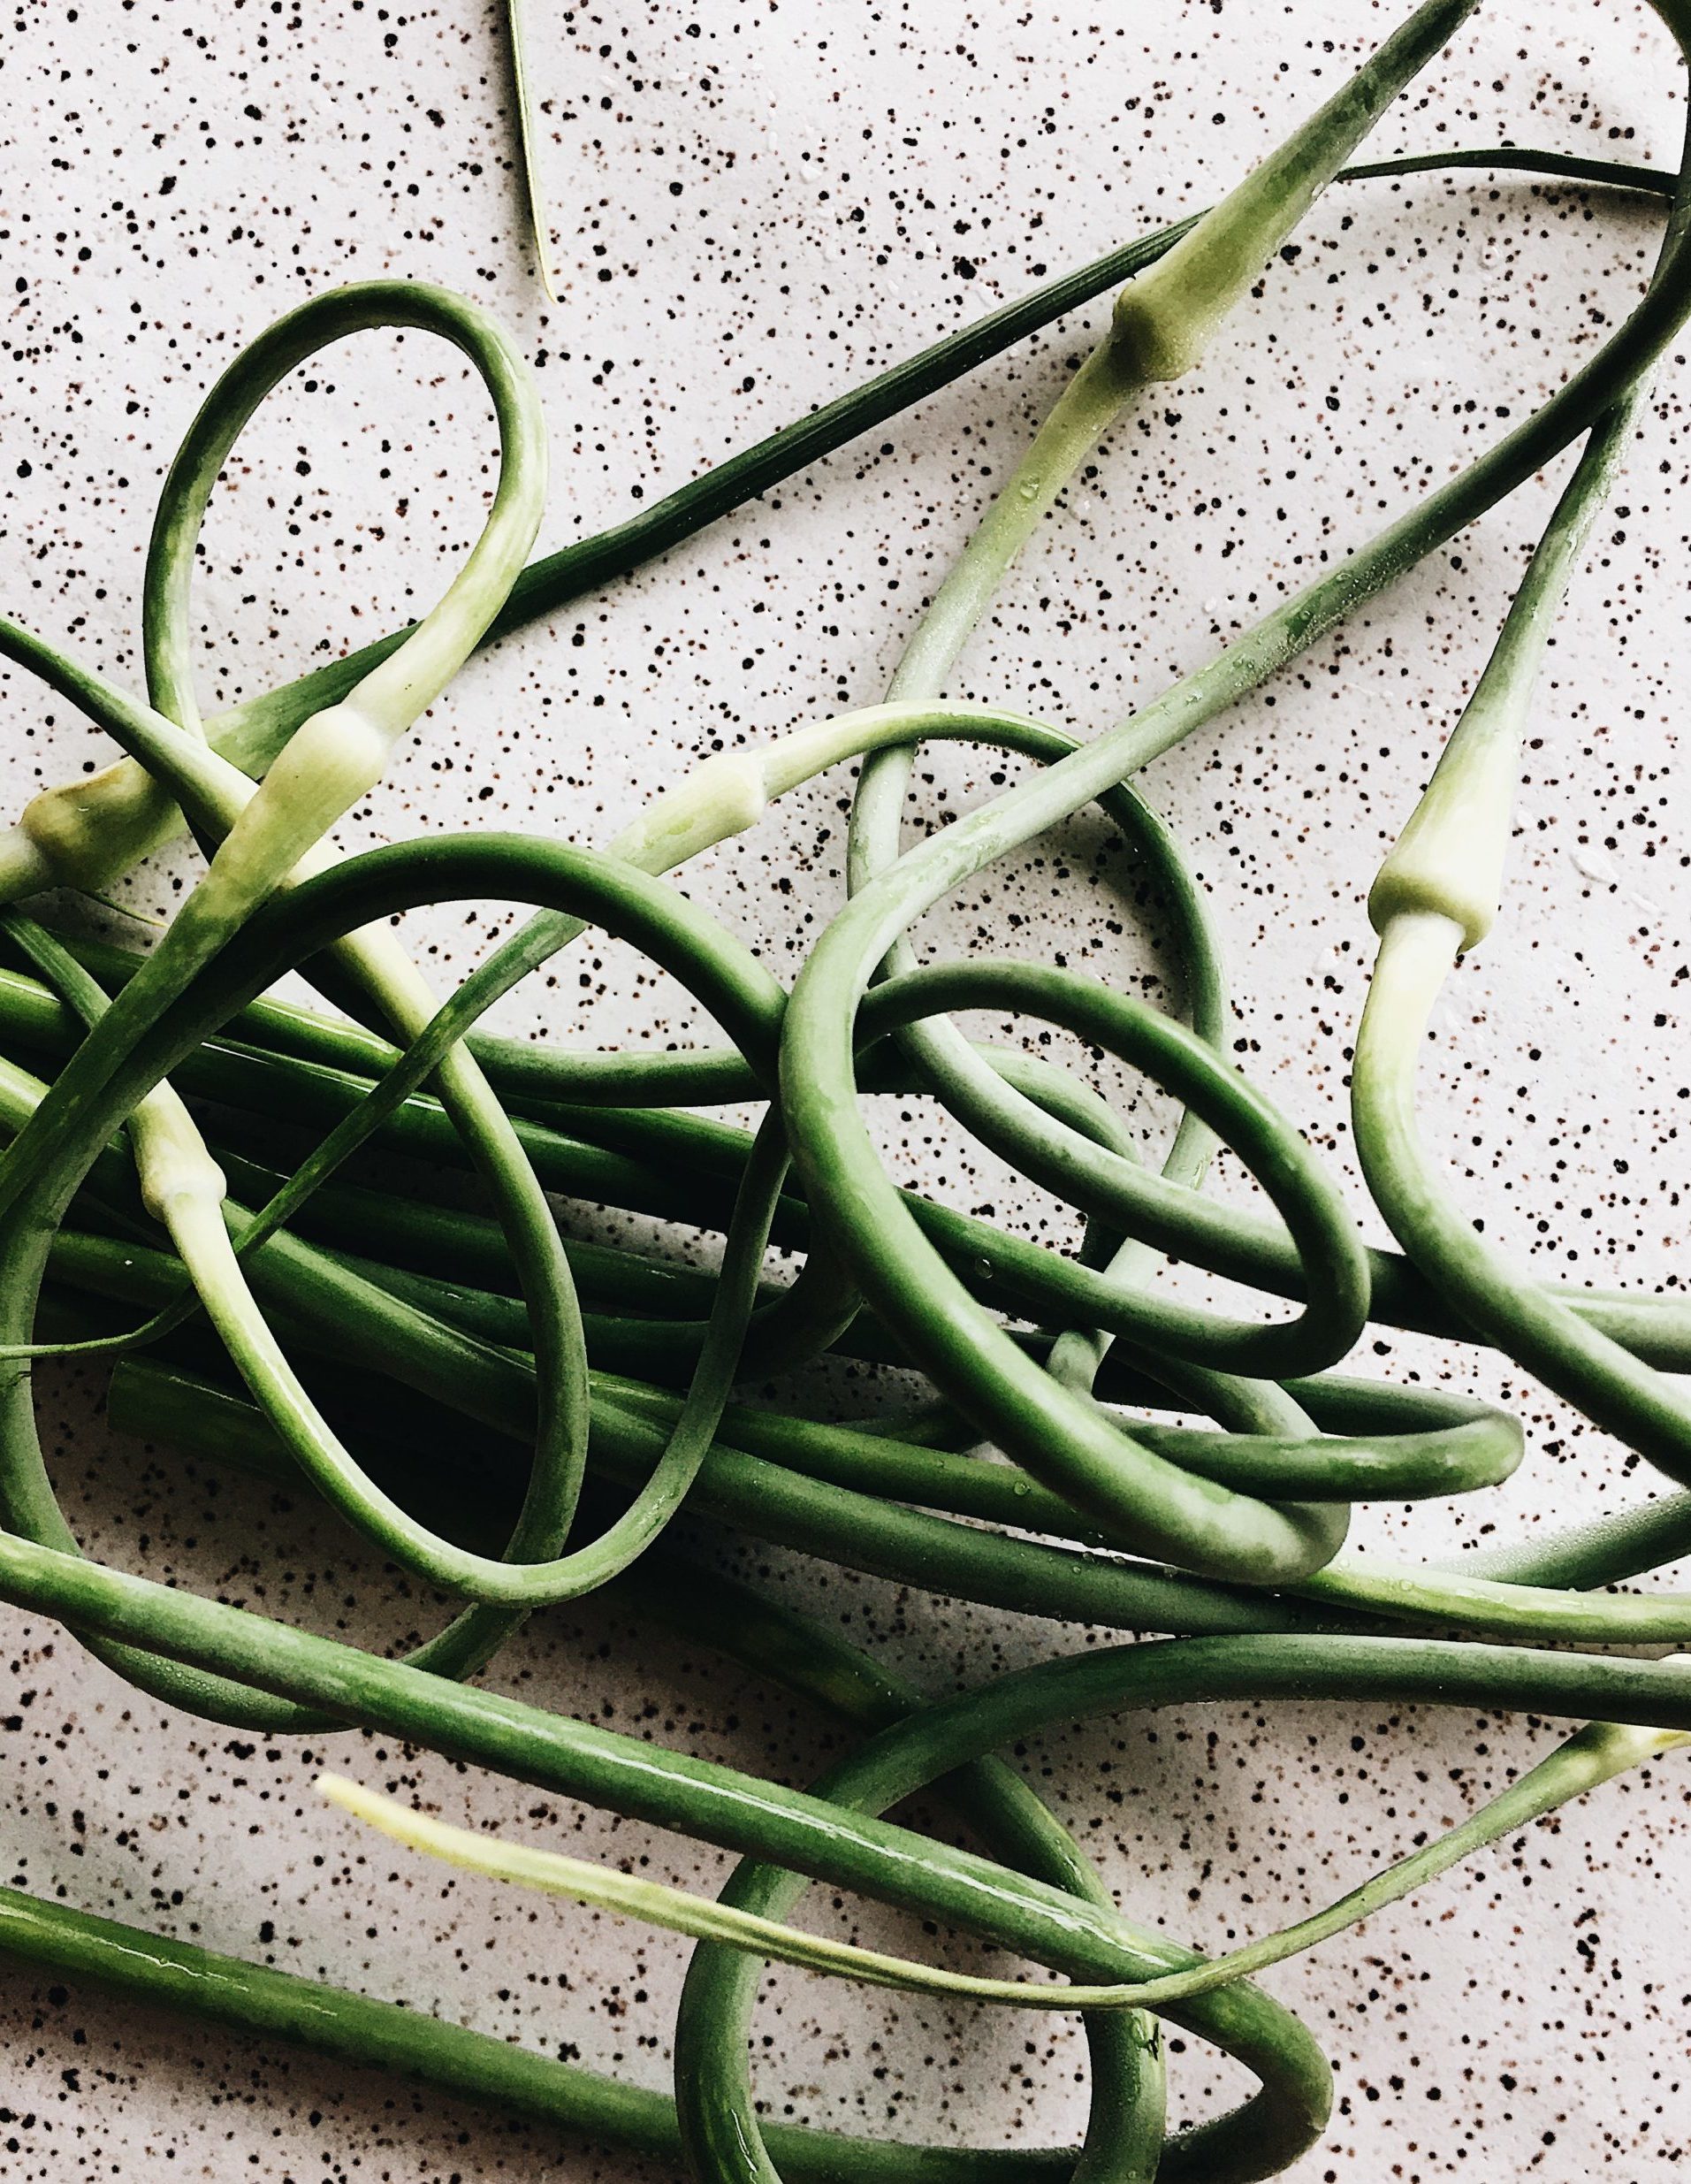 Garlic scapes before trimming to cook.